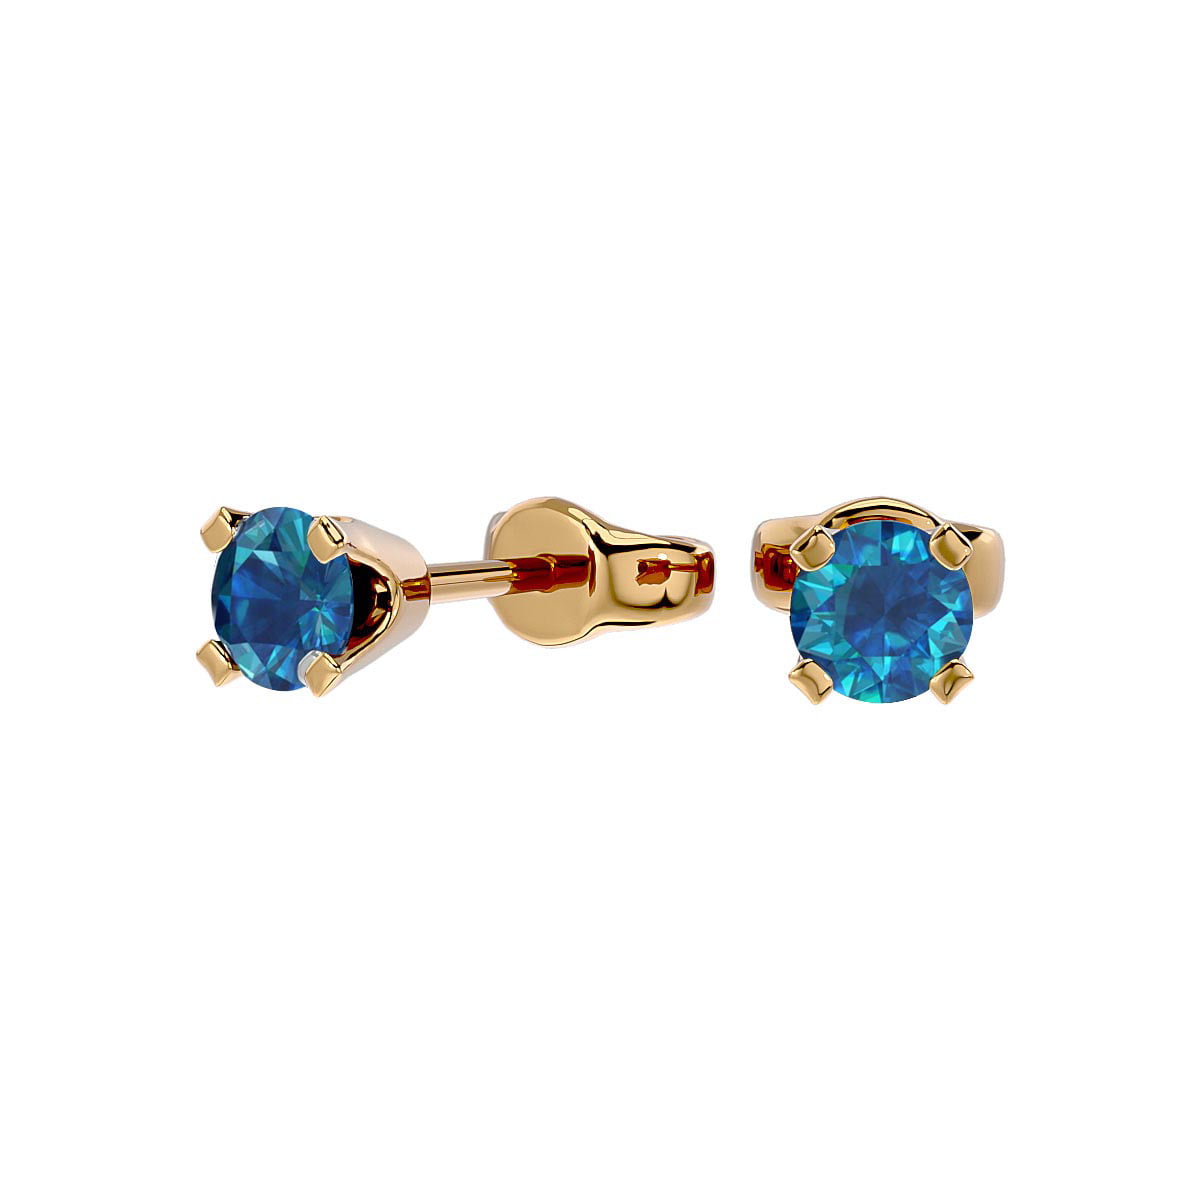 Jewel Tie Solid 10k Yellow Gold Round Blue Diamond Solitaire Stud Earrings 1/4 Cttw.